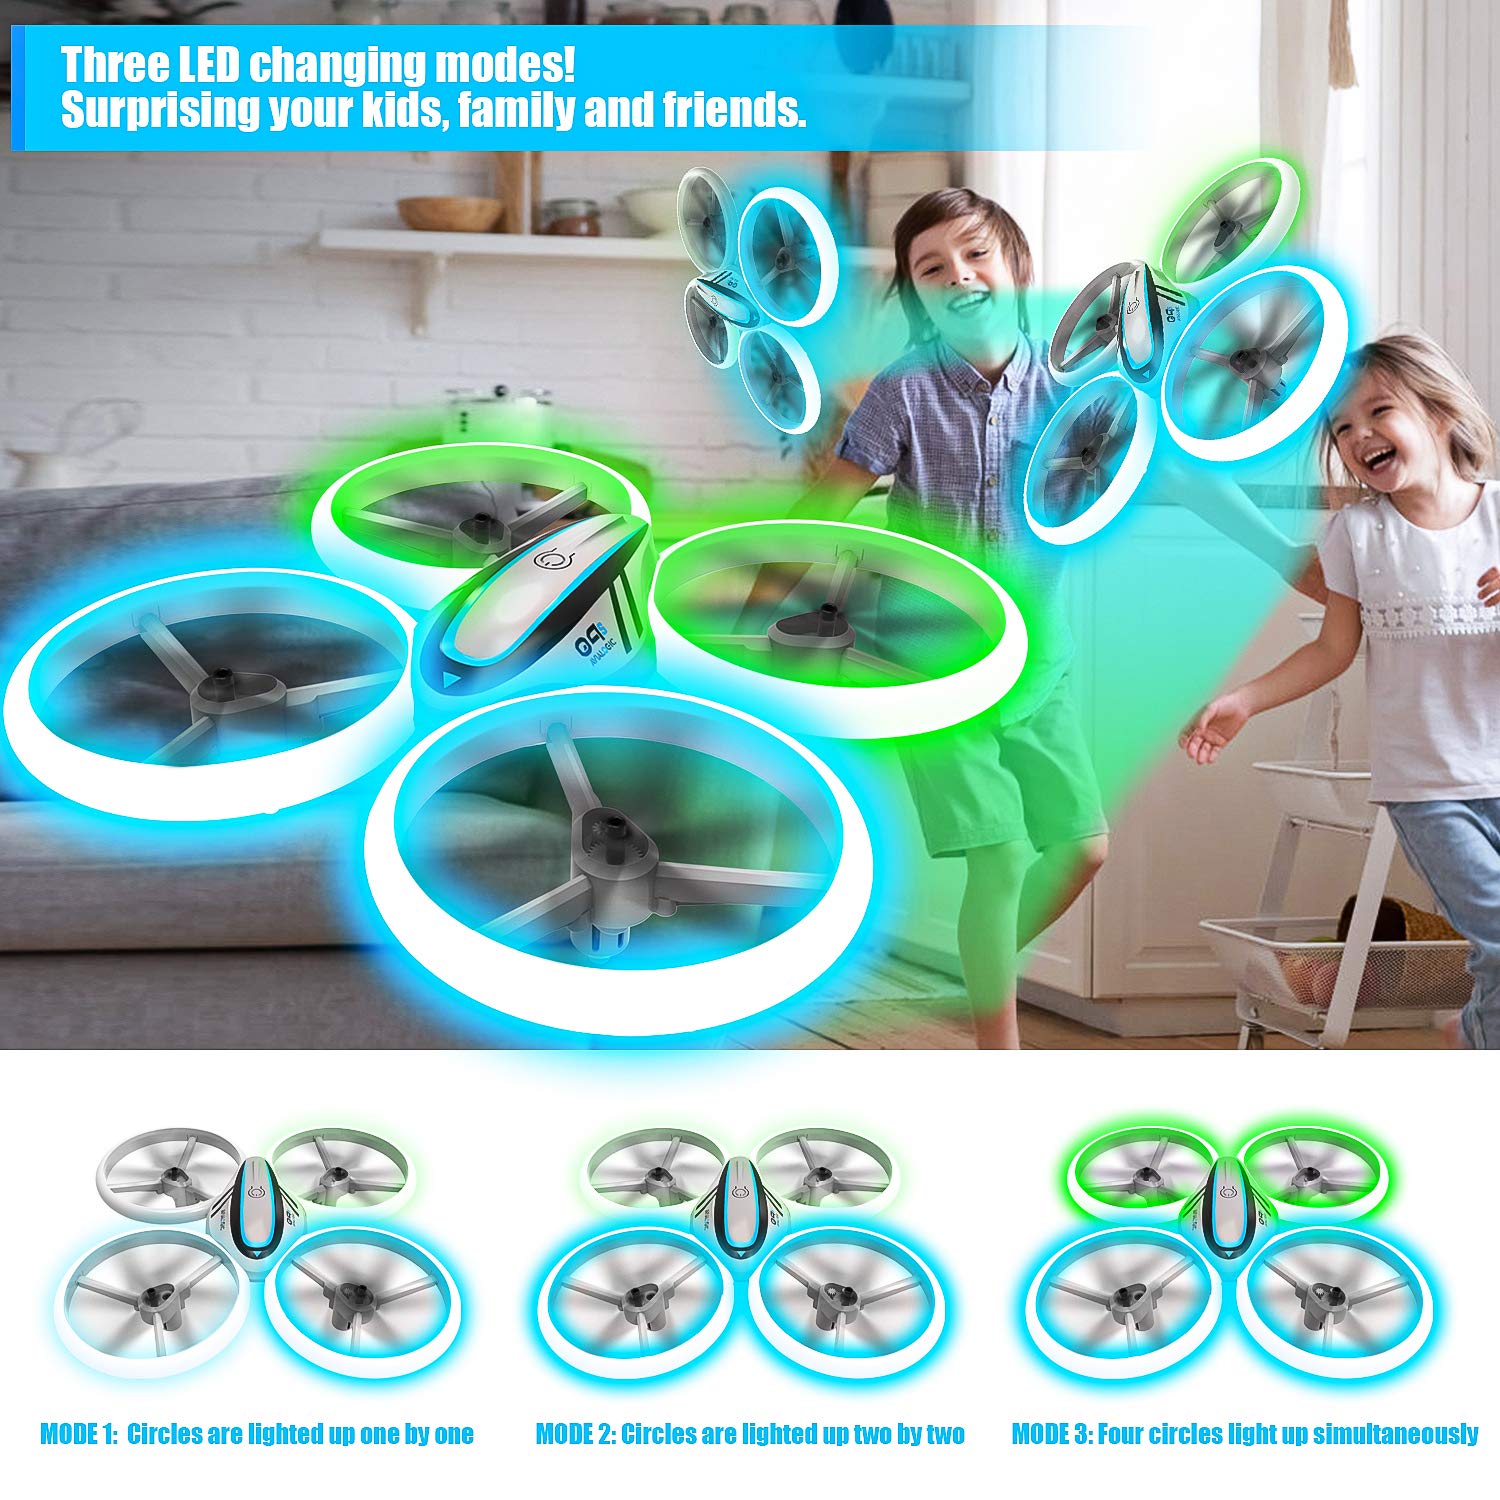 HASAKEE Q9s Drones for Kids,RC Drone with Altitude Hold and Headless Mode,Quadcopter with Blue&Green Light,Propeller Full Protect,2 Batteries and Remote Control,Easy to fly Kids Gifts Toys for Boys and Girls